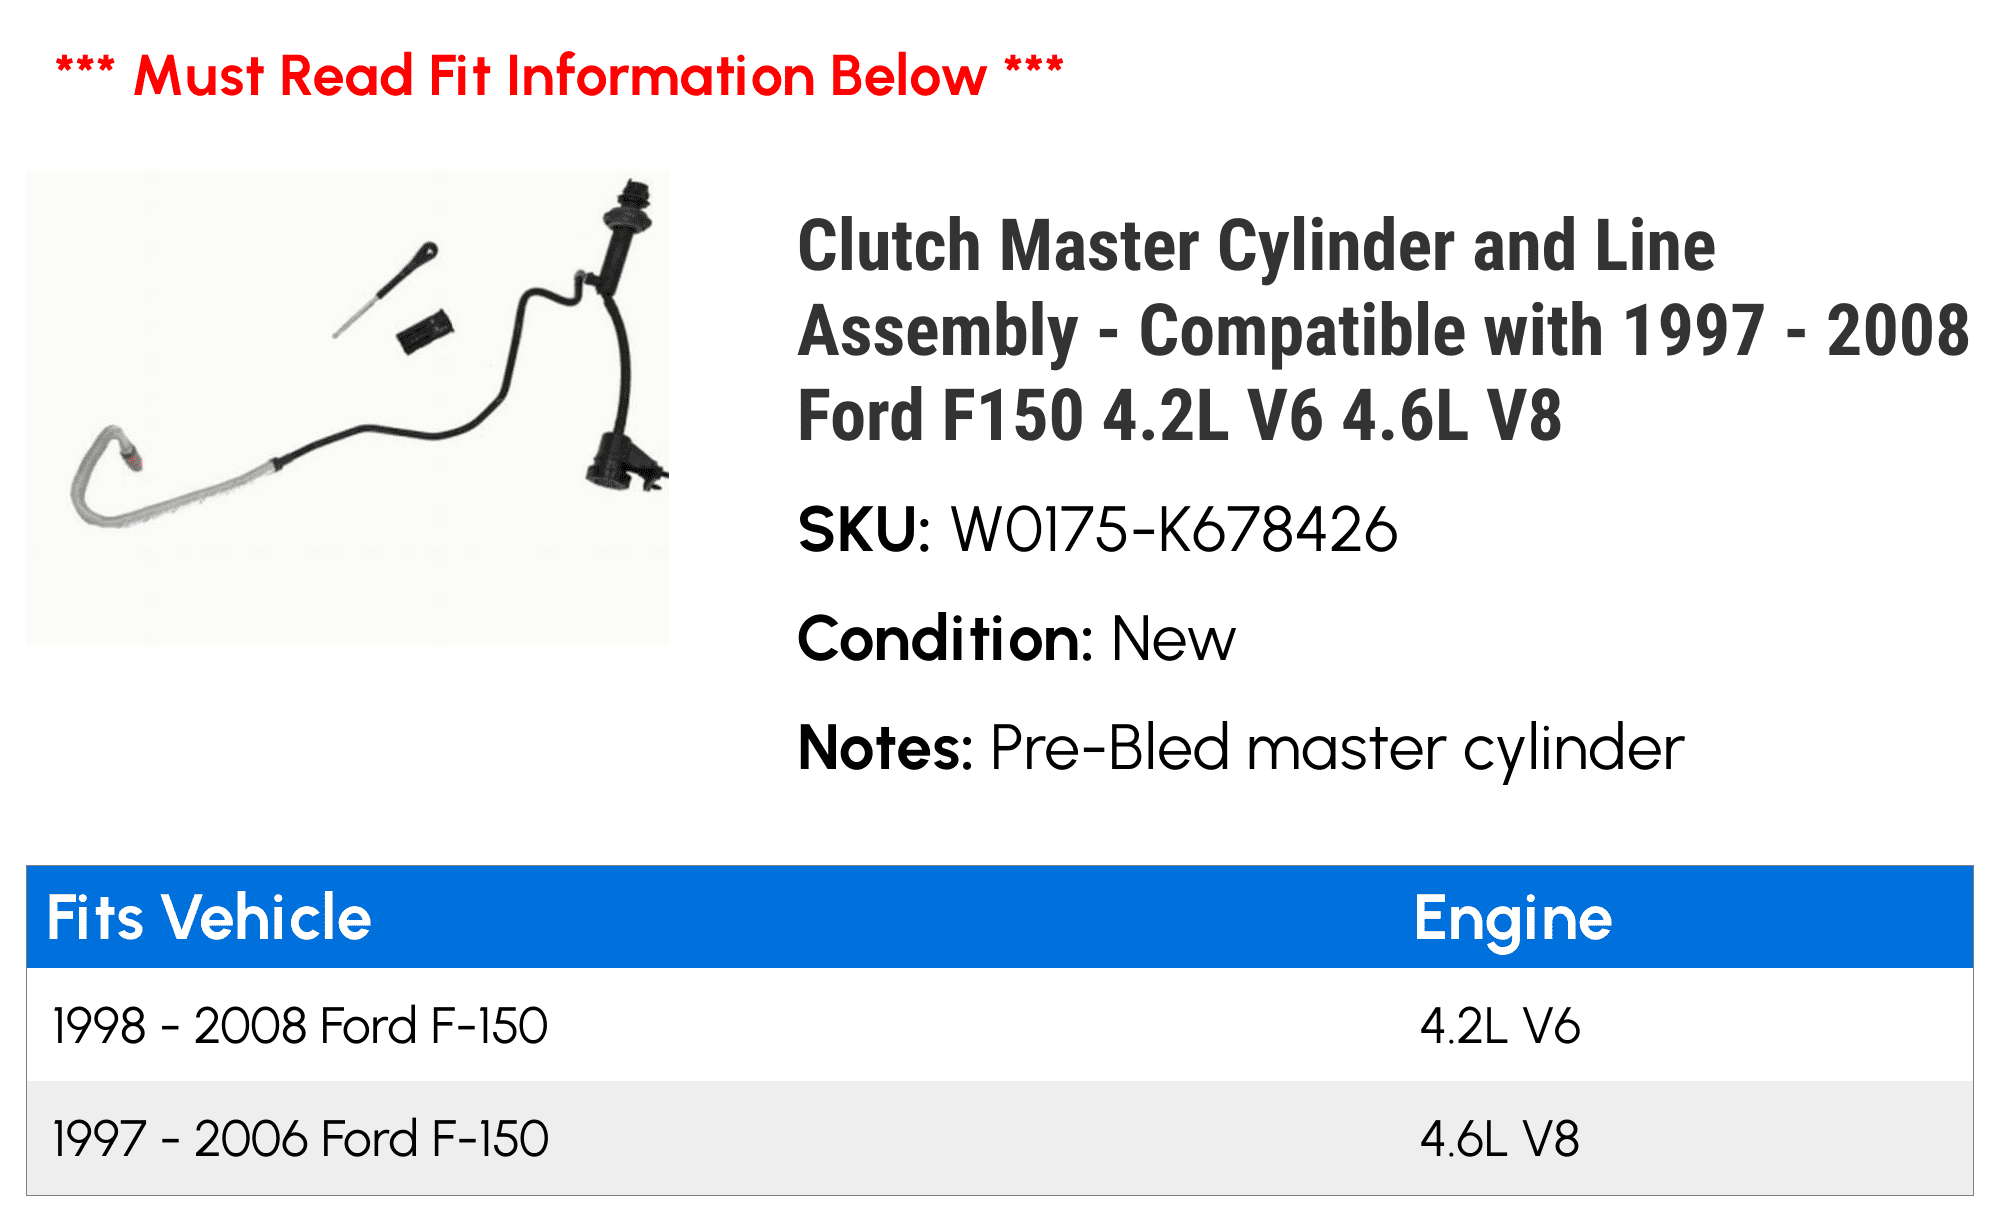 Compatible with 1997-2008 Ford F150 4.2L V6 4.6L V8 Clutch Master Cylinder and Line Assembly 